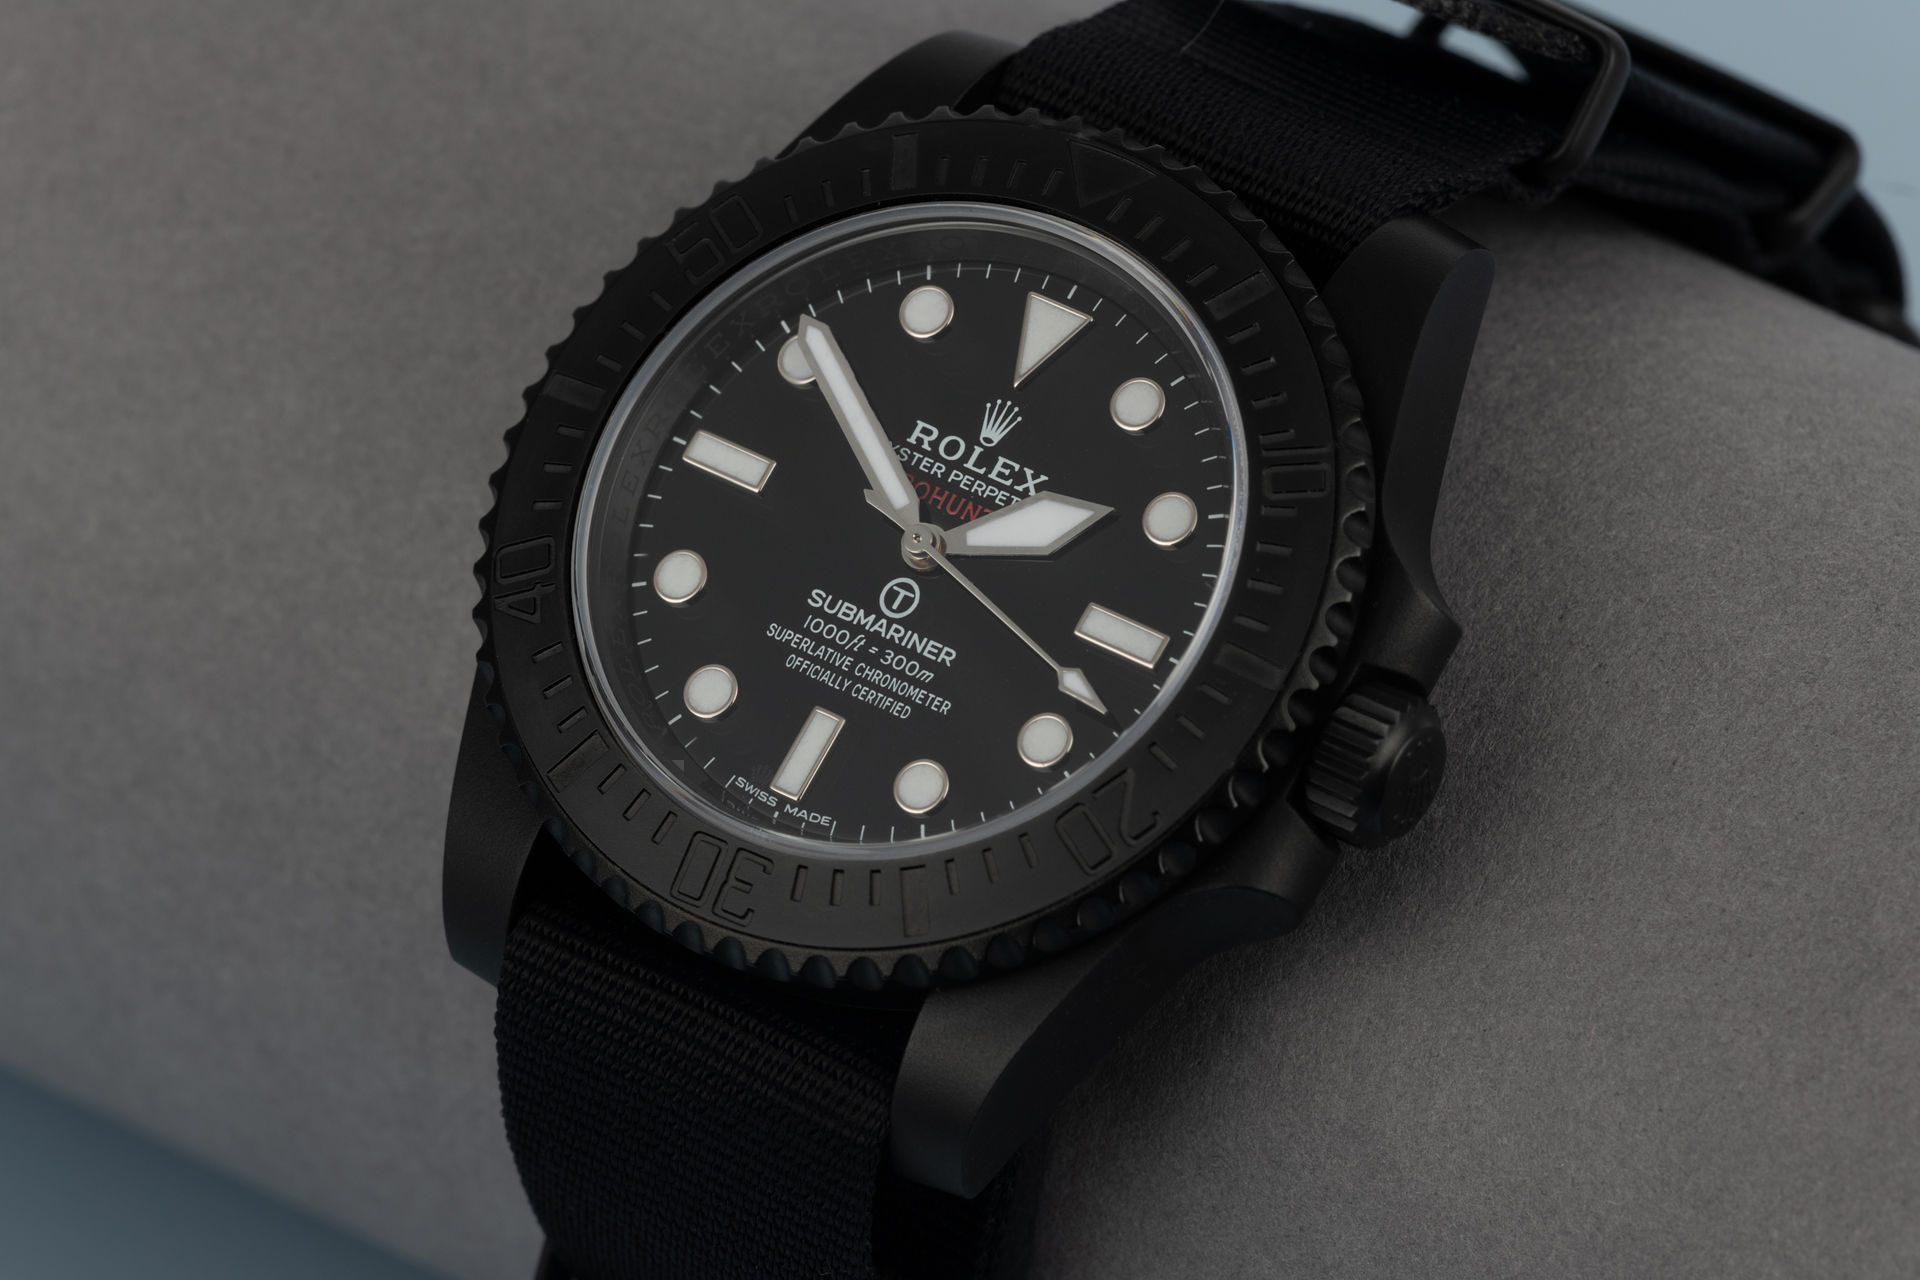 ref 114060 | One of 100 'Limited Edition' | Pro Hunter Submariner Military